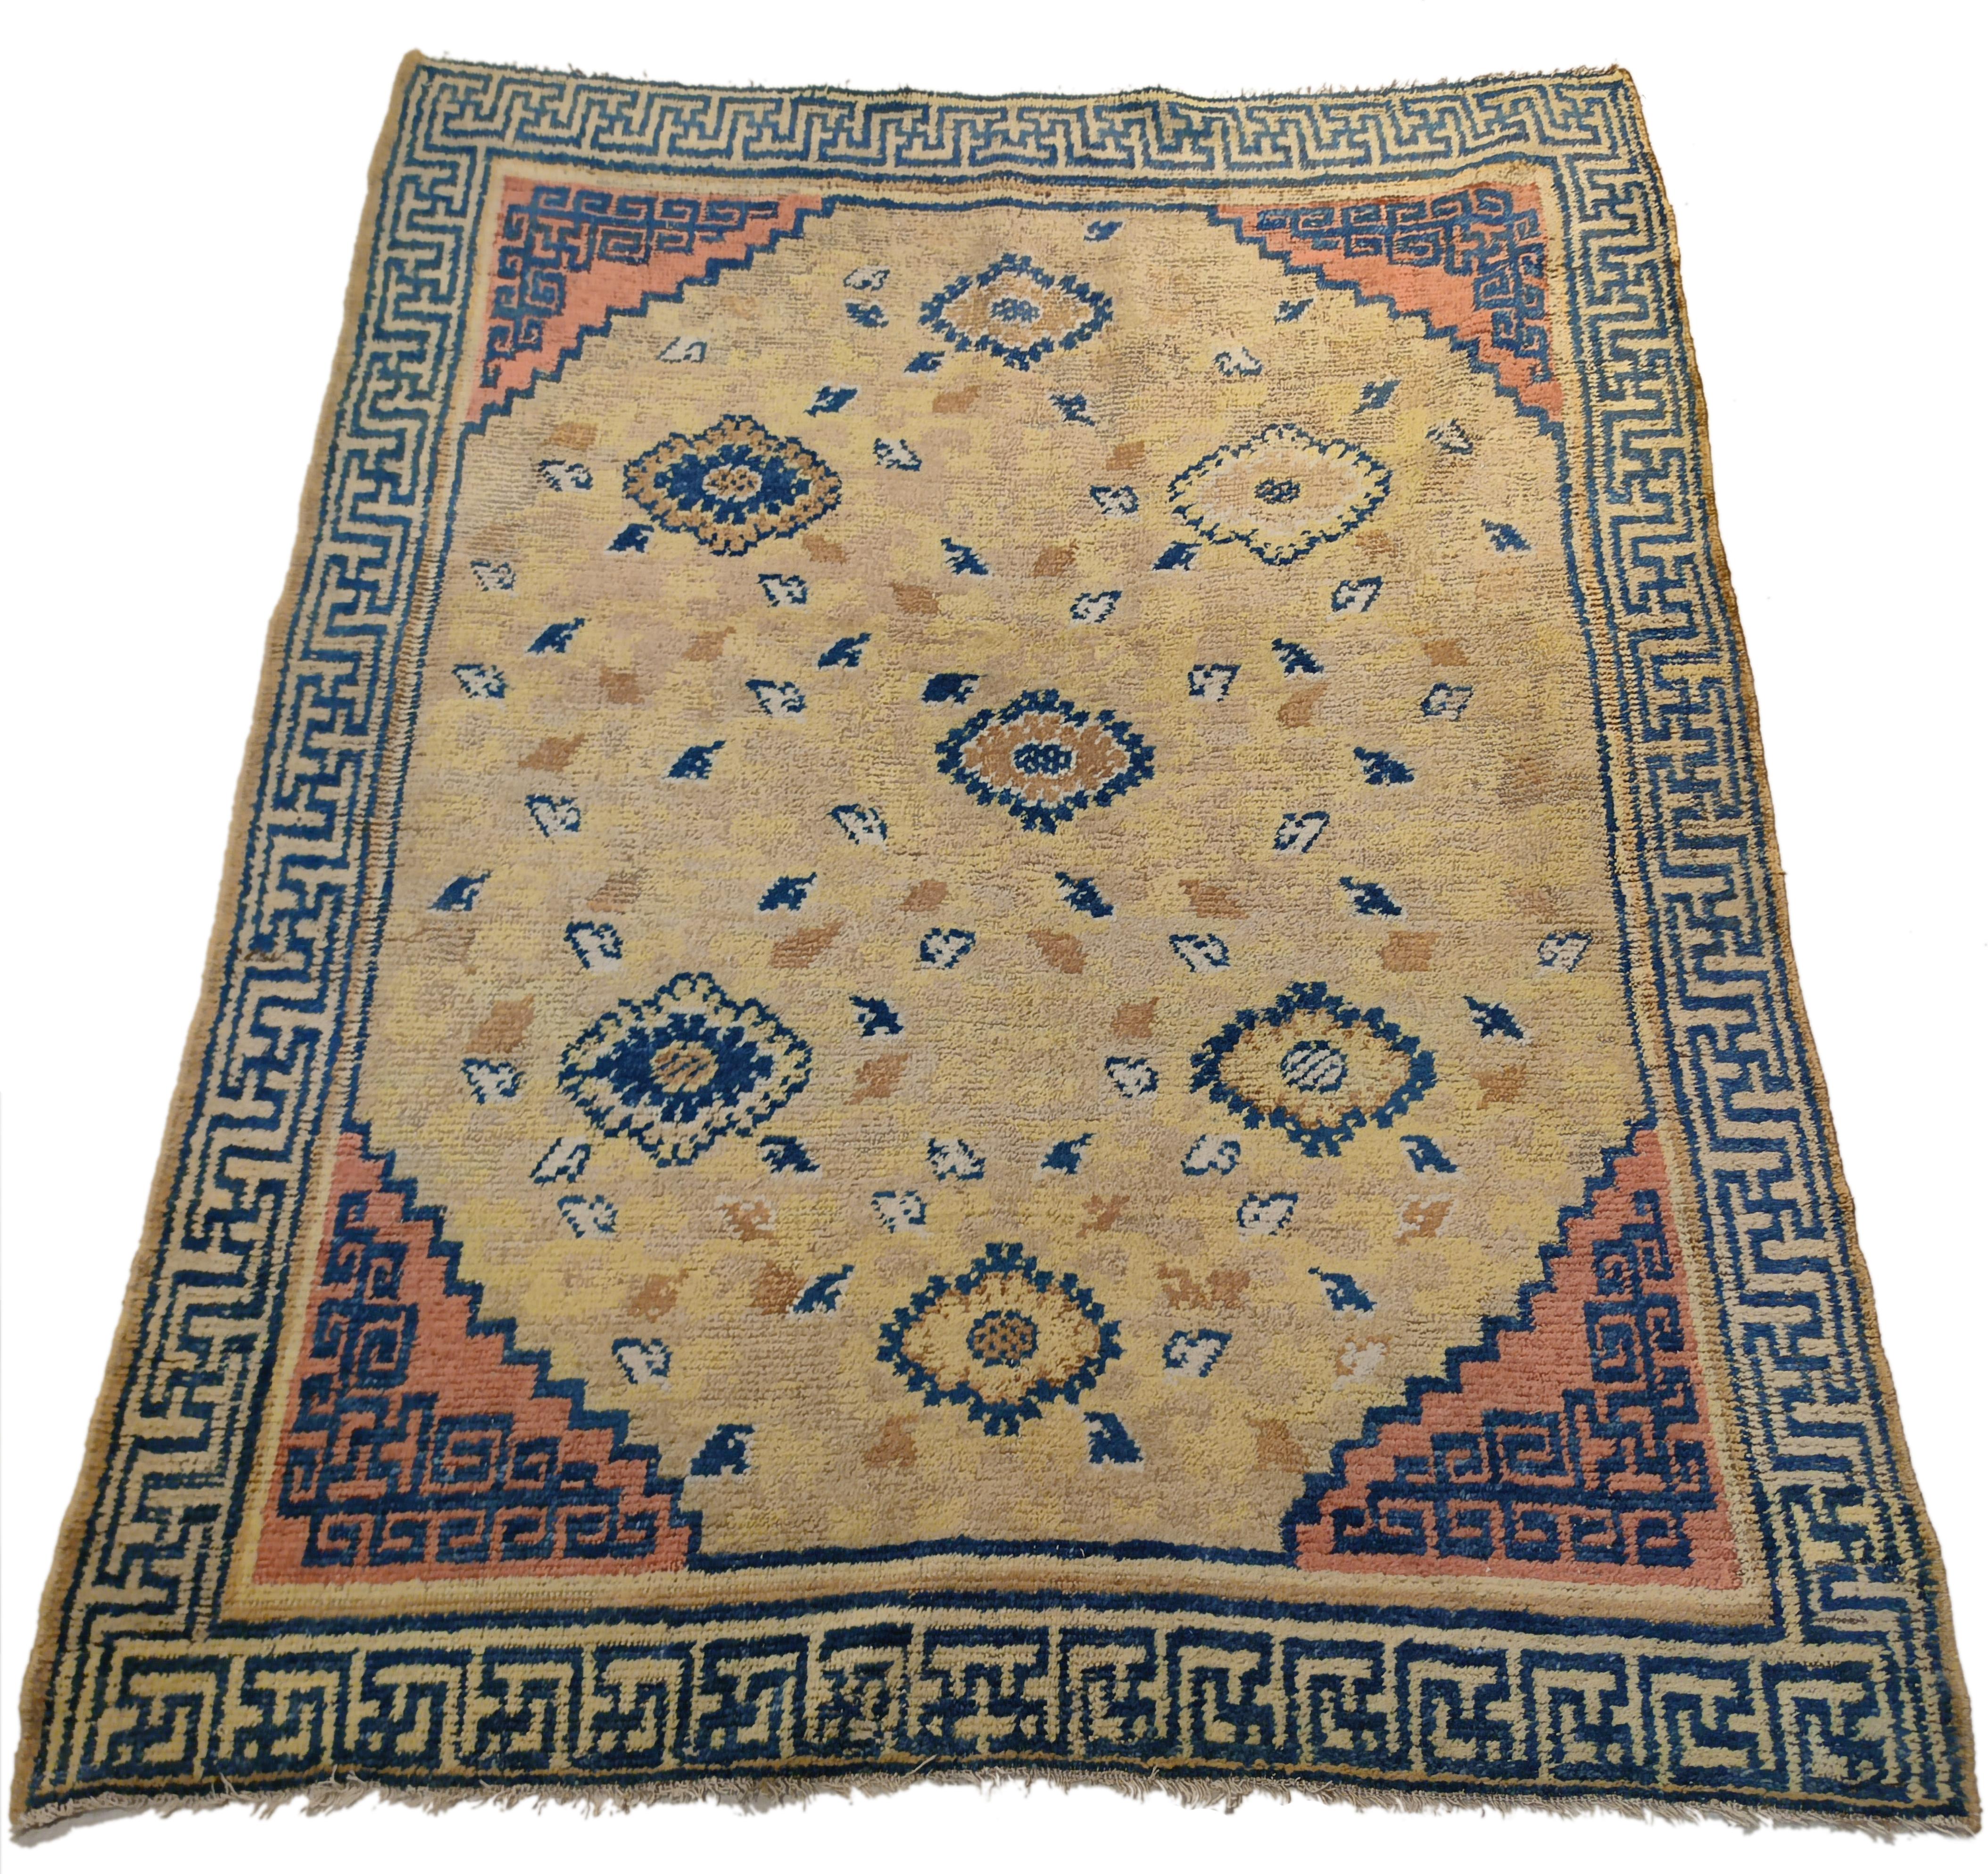 A very unusual Chinese rug, possibly used originally as a dais cover, which had been previously attributed to the Western region of Gansu (H. König, Gansu, Hali 138, London 2005, pl. 13, p. 58). However both the structure and the colours are fairly